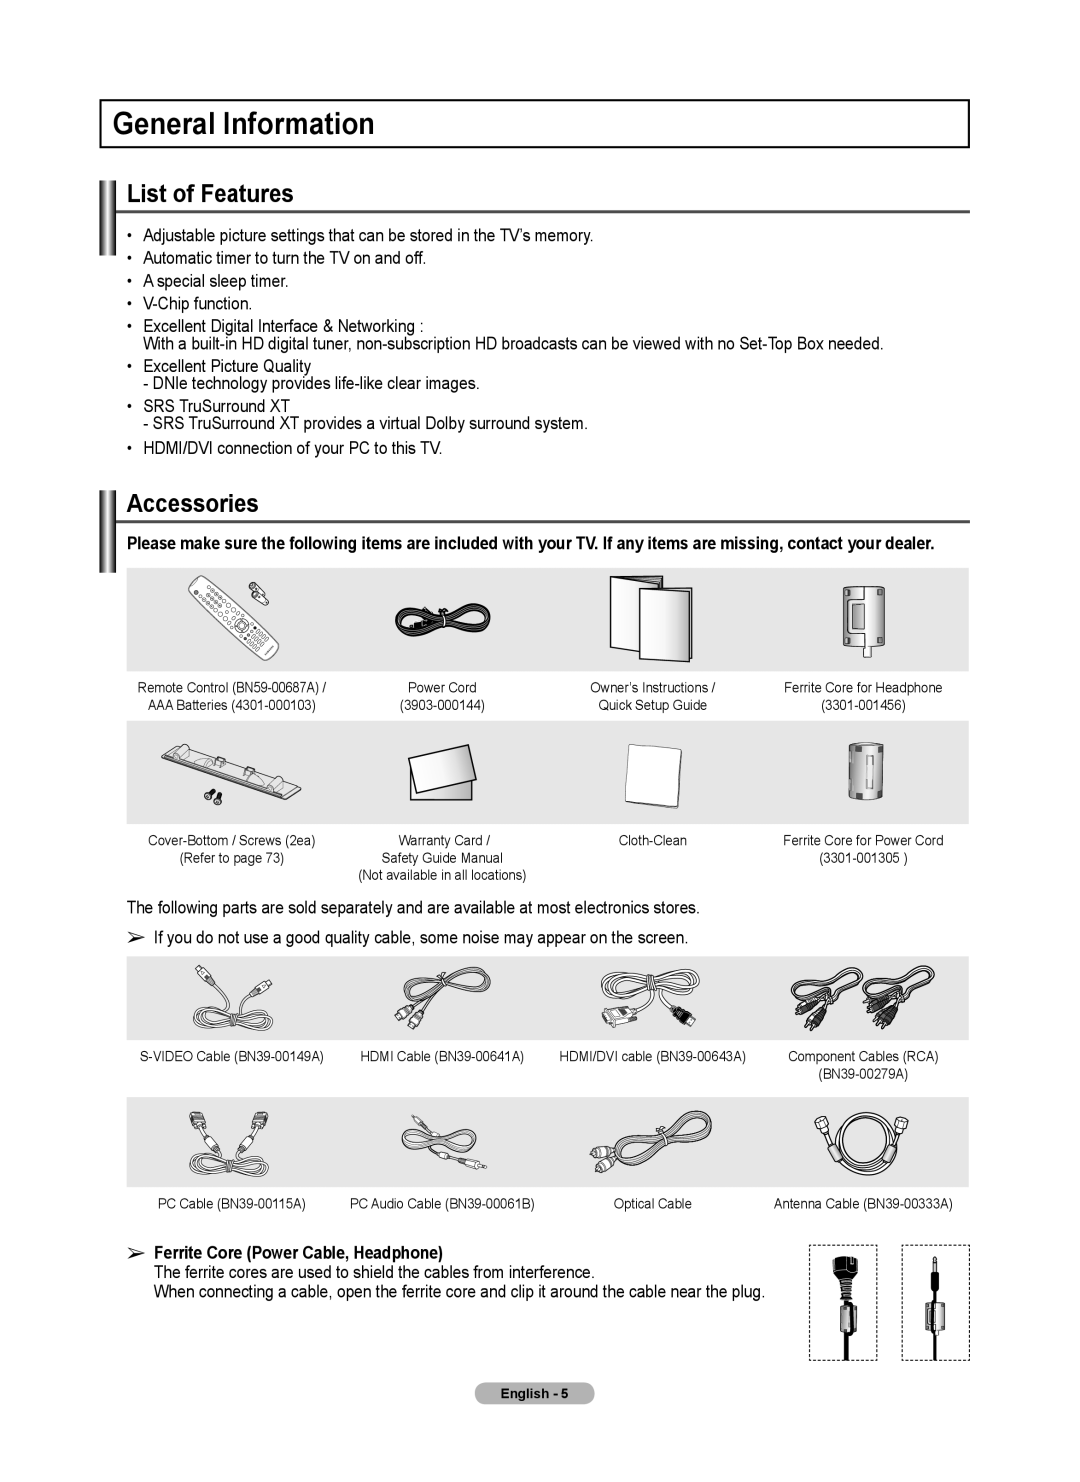 Samsung 460 user manual General Information, List of Features, Accessories, Ferrite Core Power Cable, Headphone 